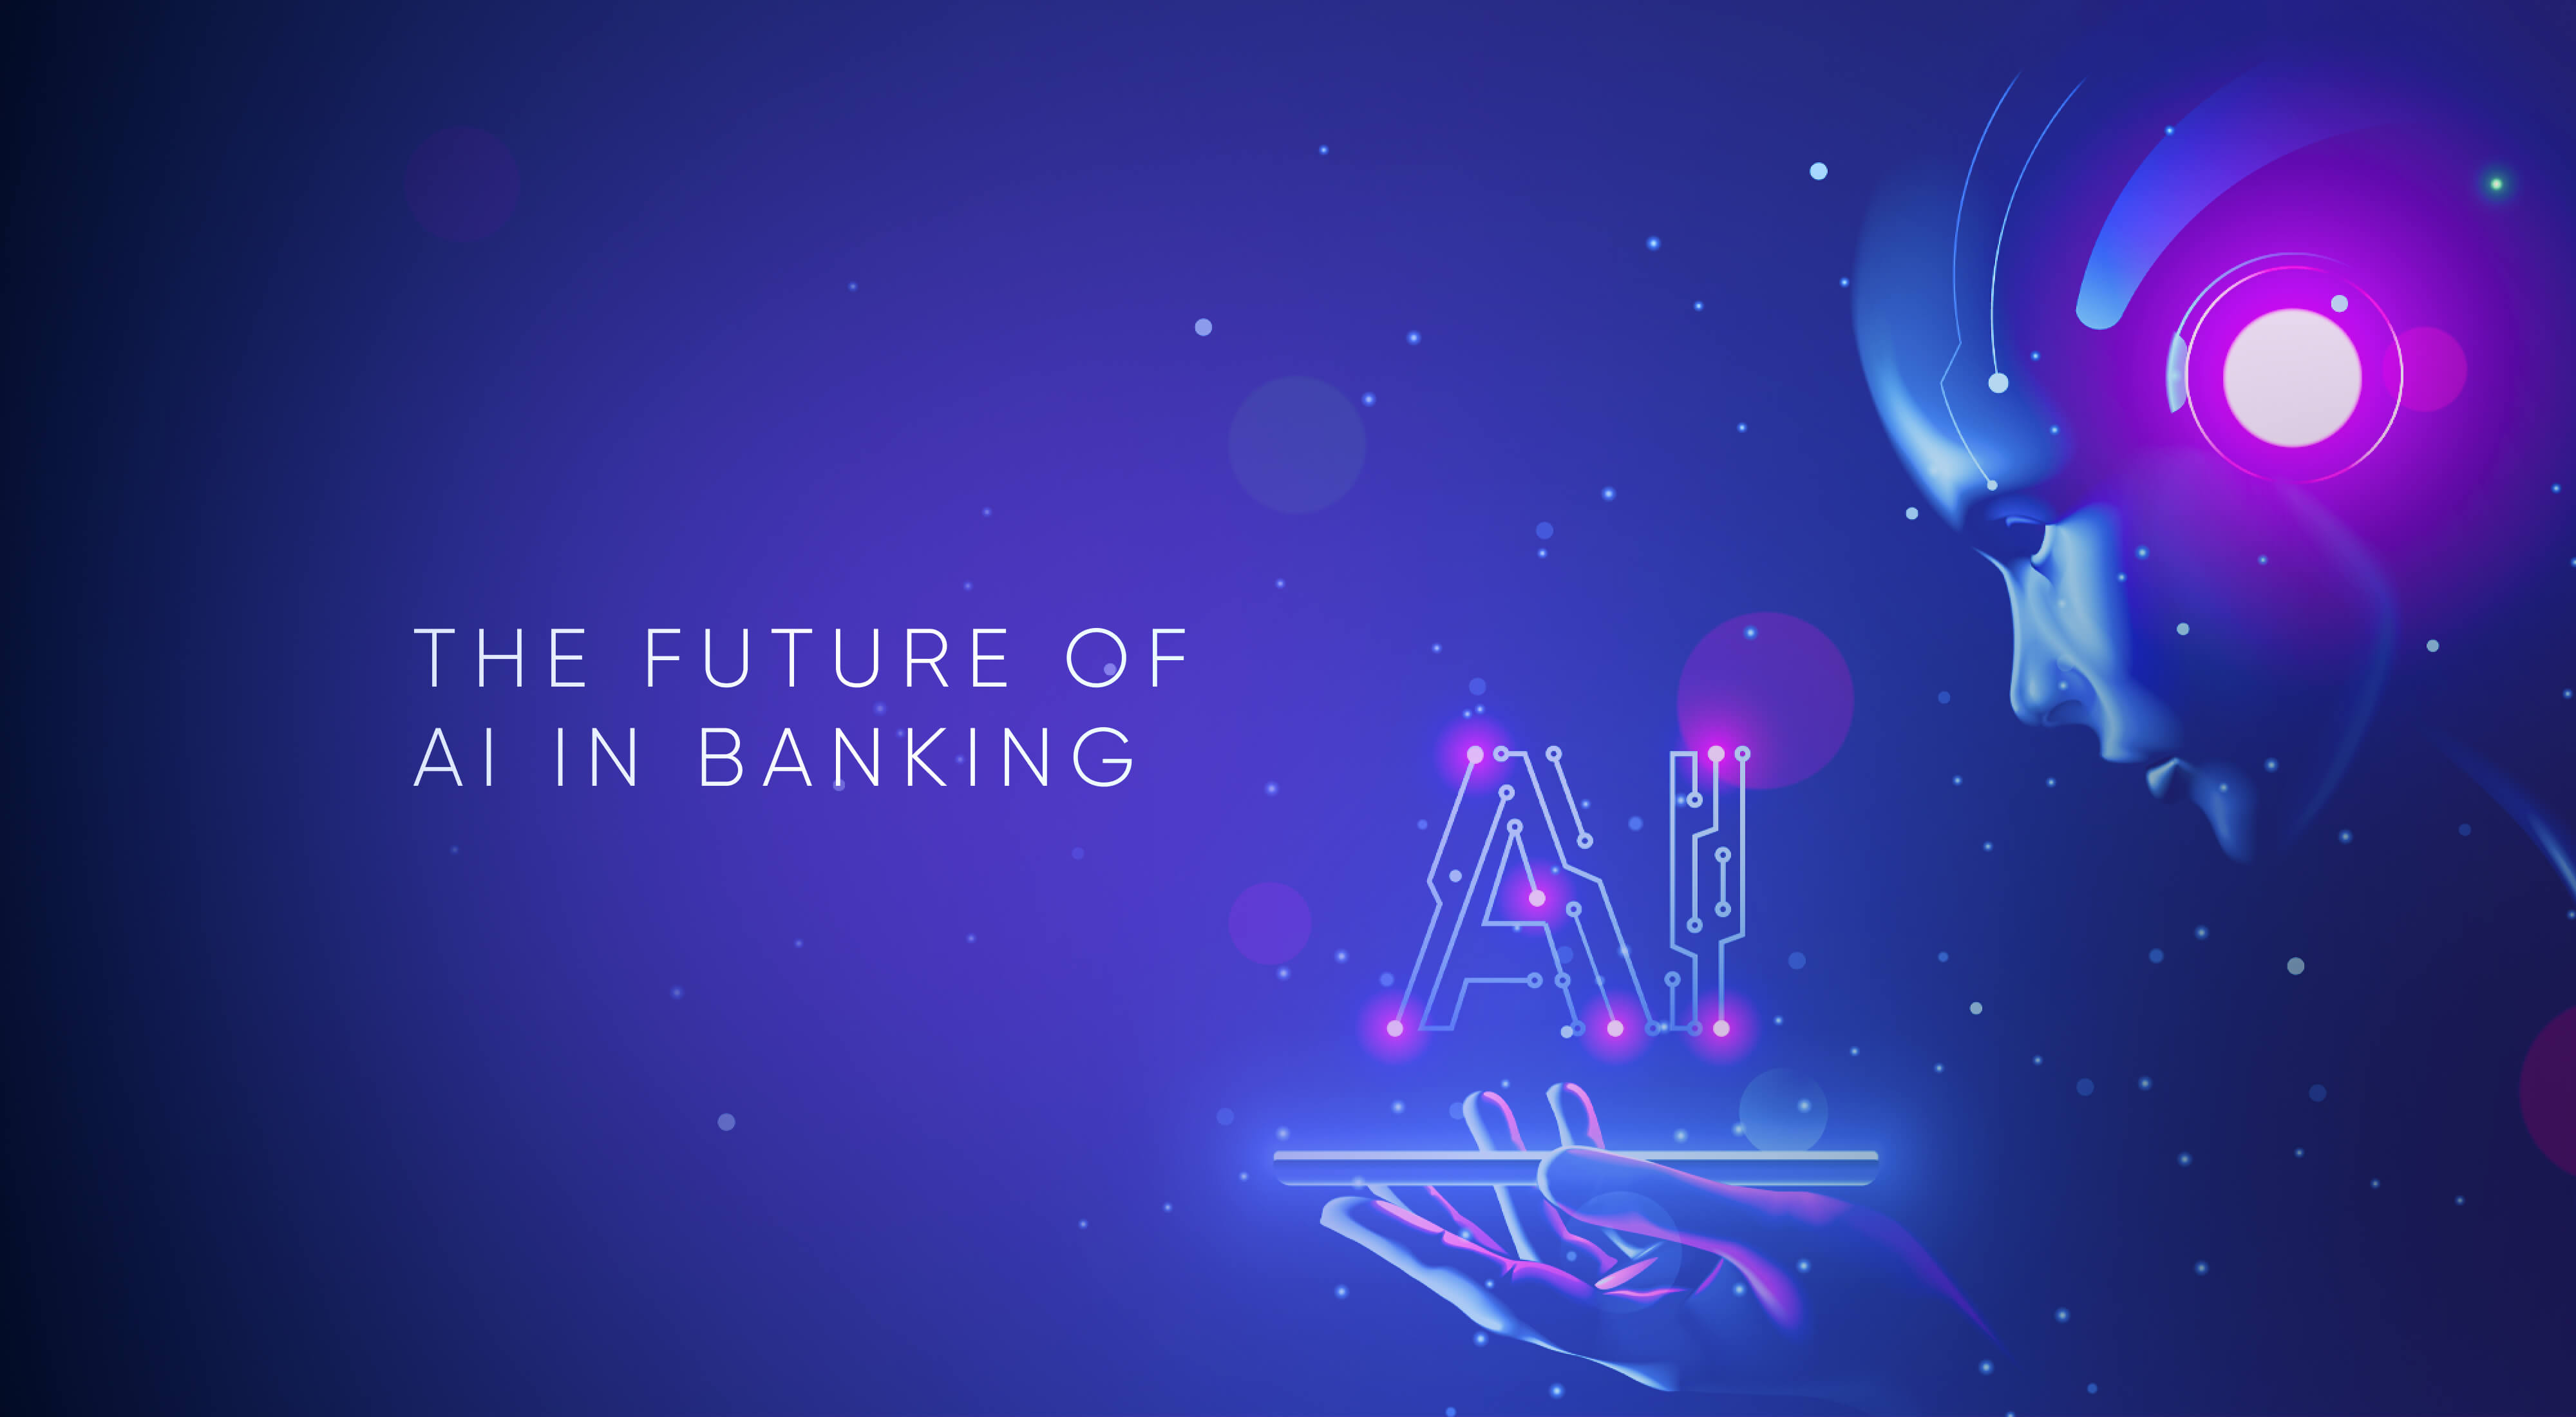 The Future of AI in Banking And Finance